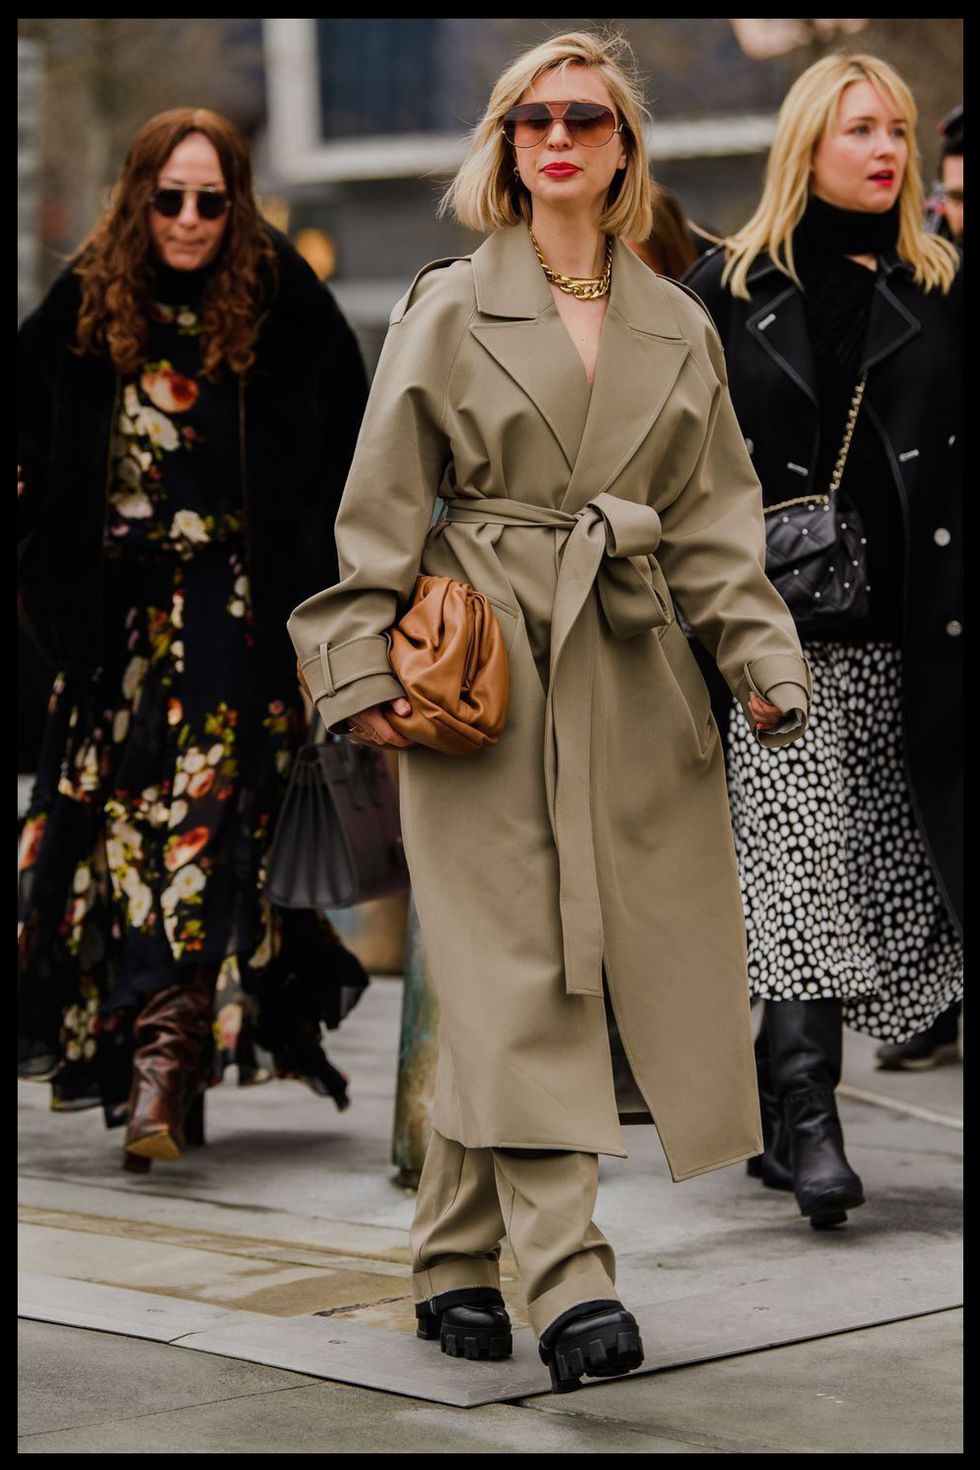 kerry pieri wears a trench coat and trousers at new york fashion week